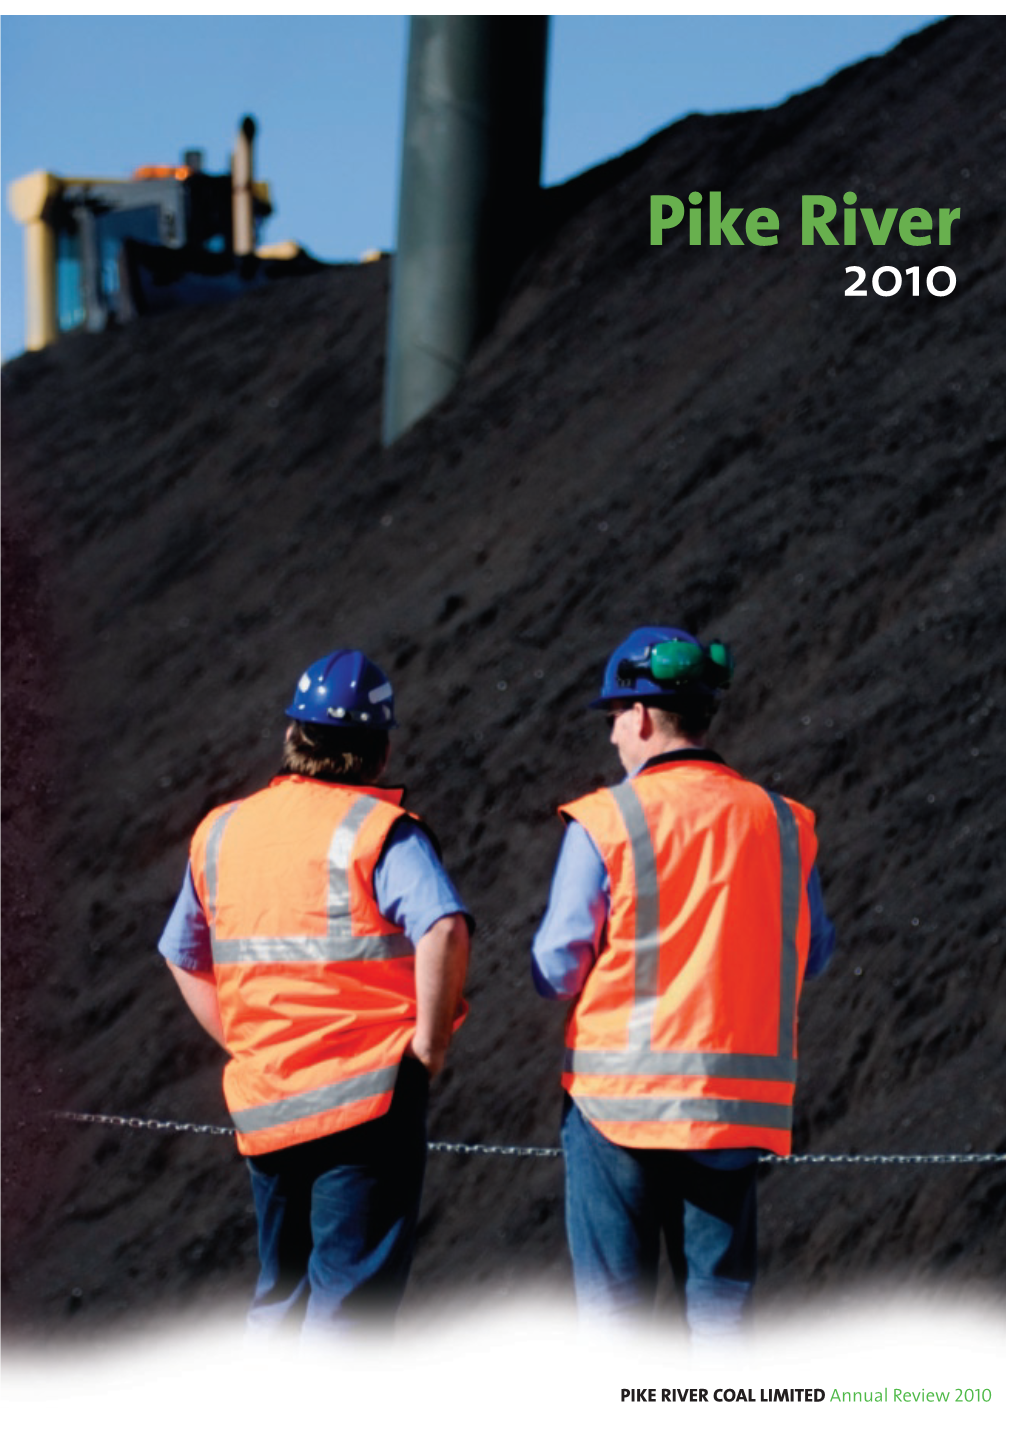 Pike River Coal Limited